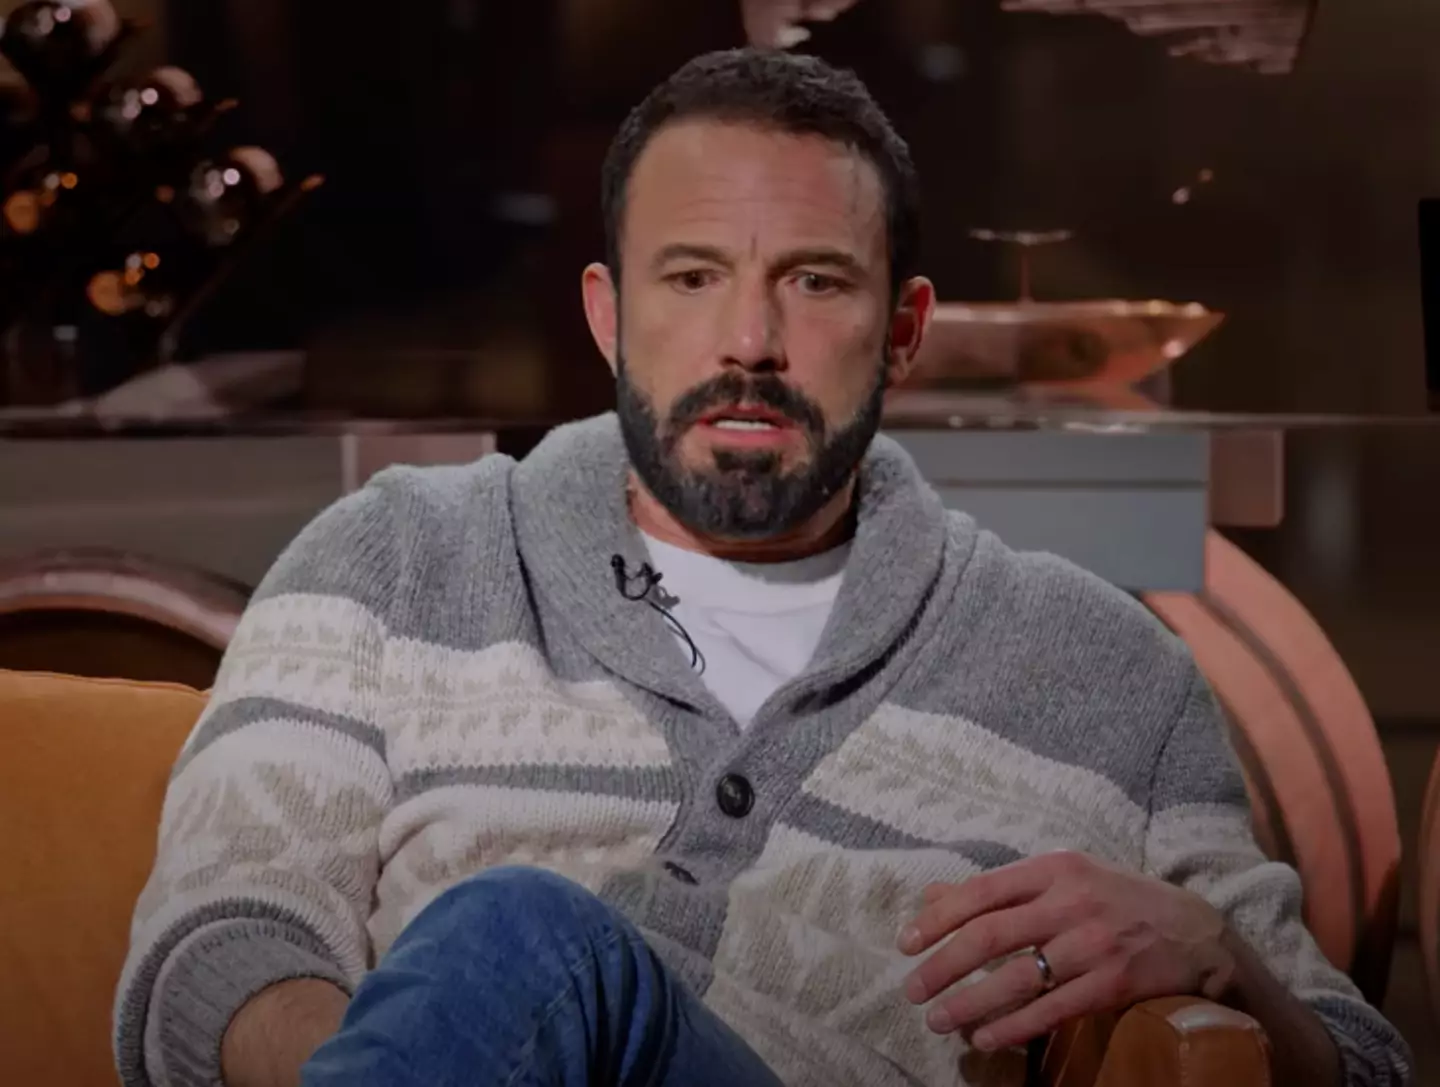 Ben Affleck tends to give off an angry look in photos. (Peacock)